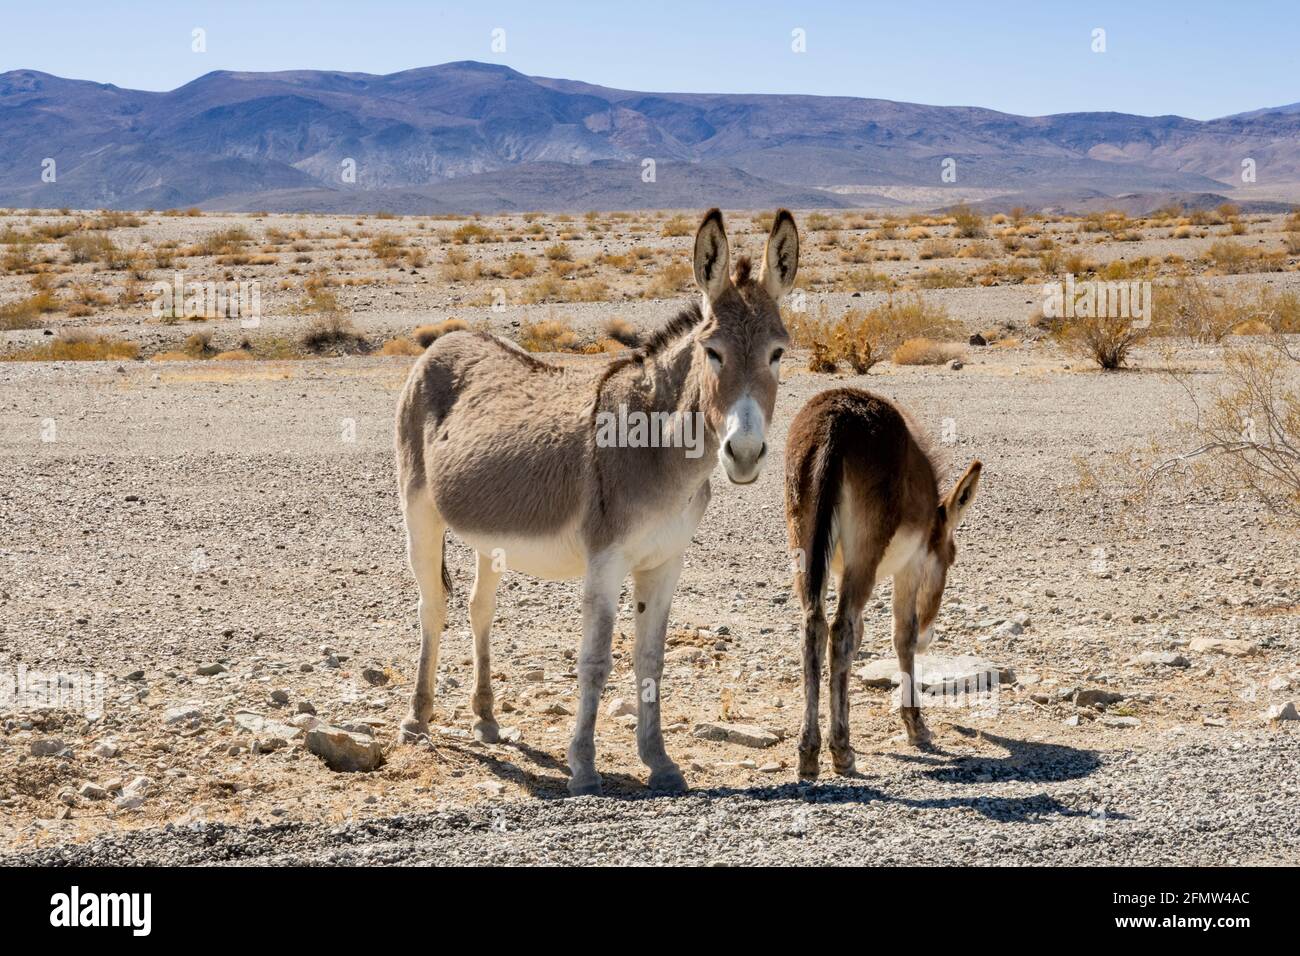 Two Wild Donkeys In The Desert of Death Valley National Park Stock Photo